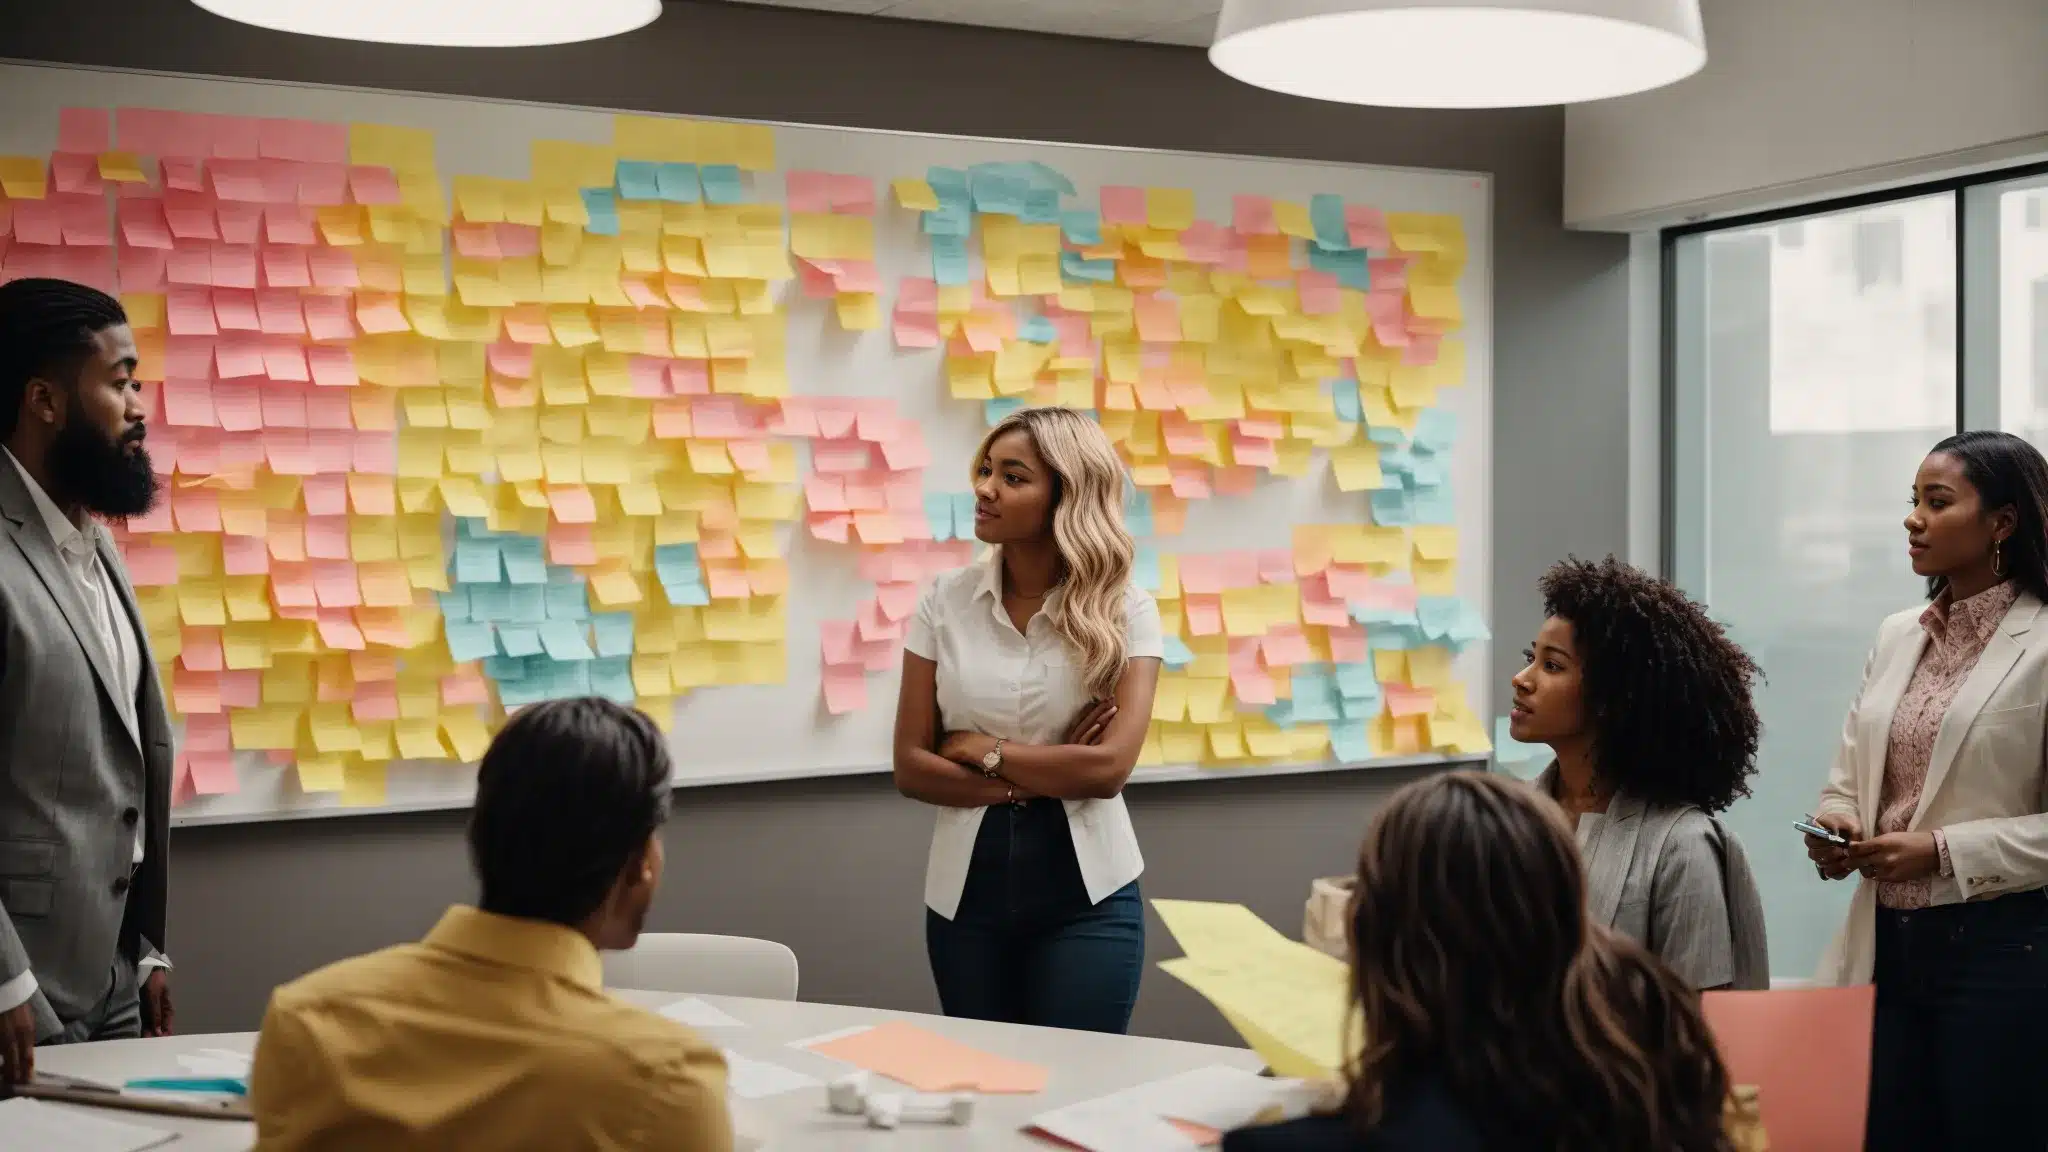 A Brainstorming Session With Diverse Professionals Clustered Around A Whiteboard Filled With Colorful Sticky Notes, Highlighting Brand Concepts.